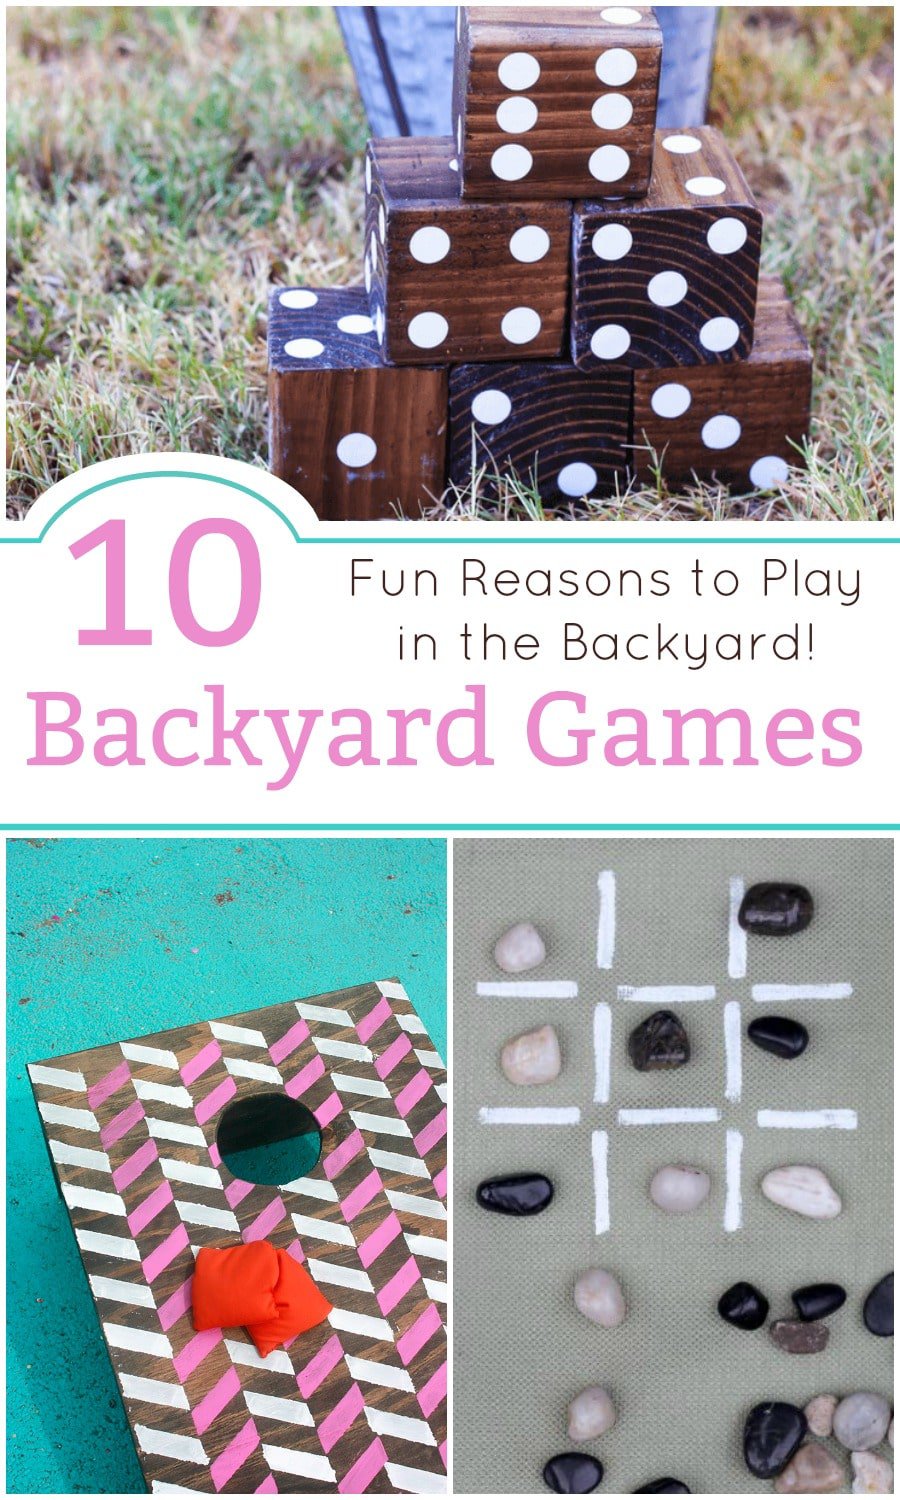 The weather is so nice! Make plans to spend more time outside with your family. Here are 10 games you can play in your backyard that are tons of fun! 